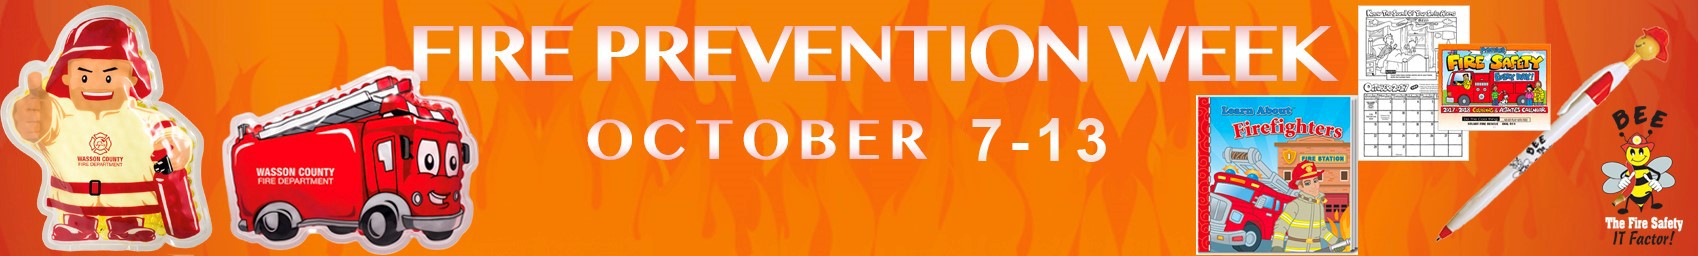 Fire Prevention Week Promotional Products | Fire Safety Promotional Items | Care Promotions